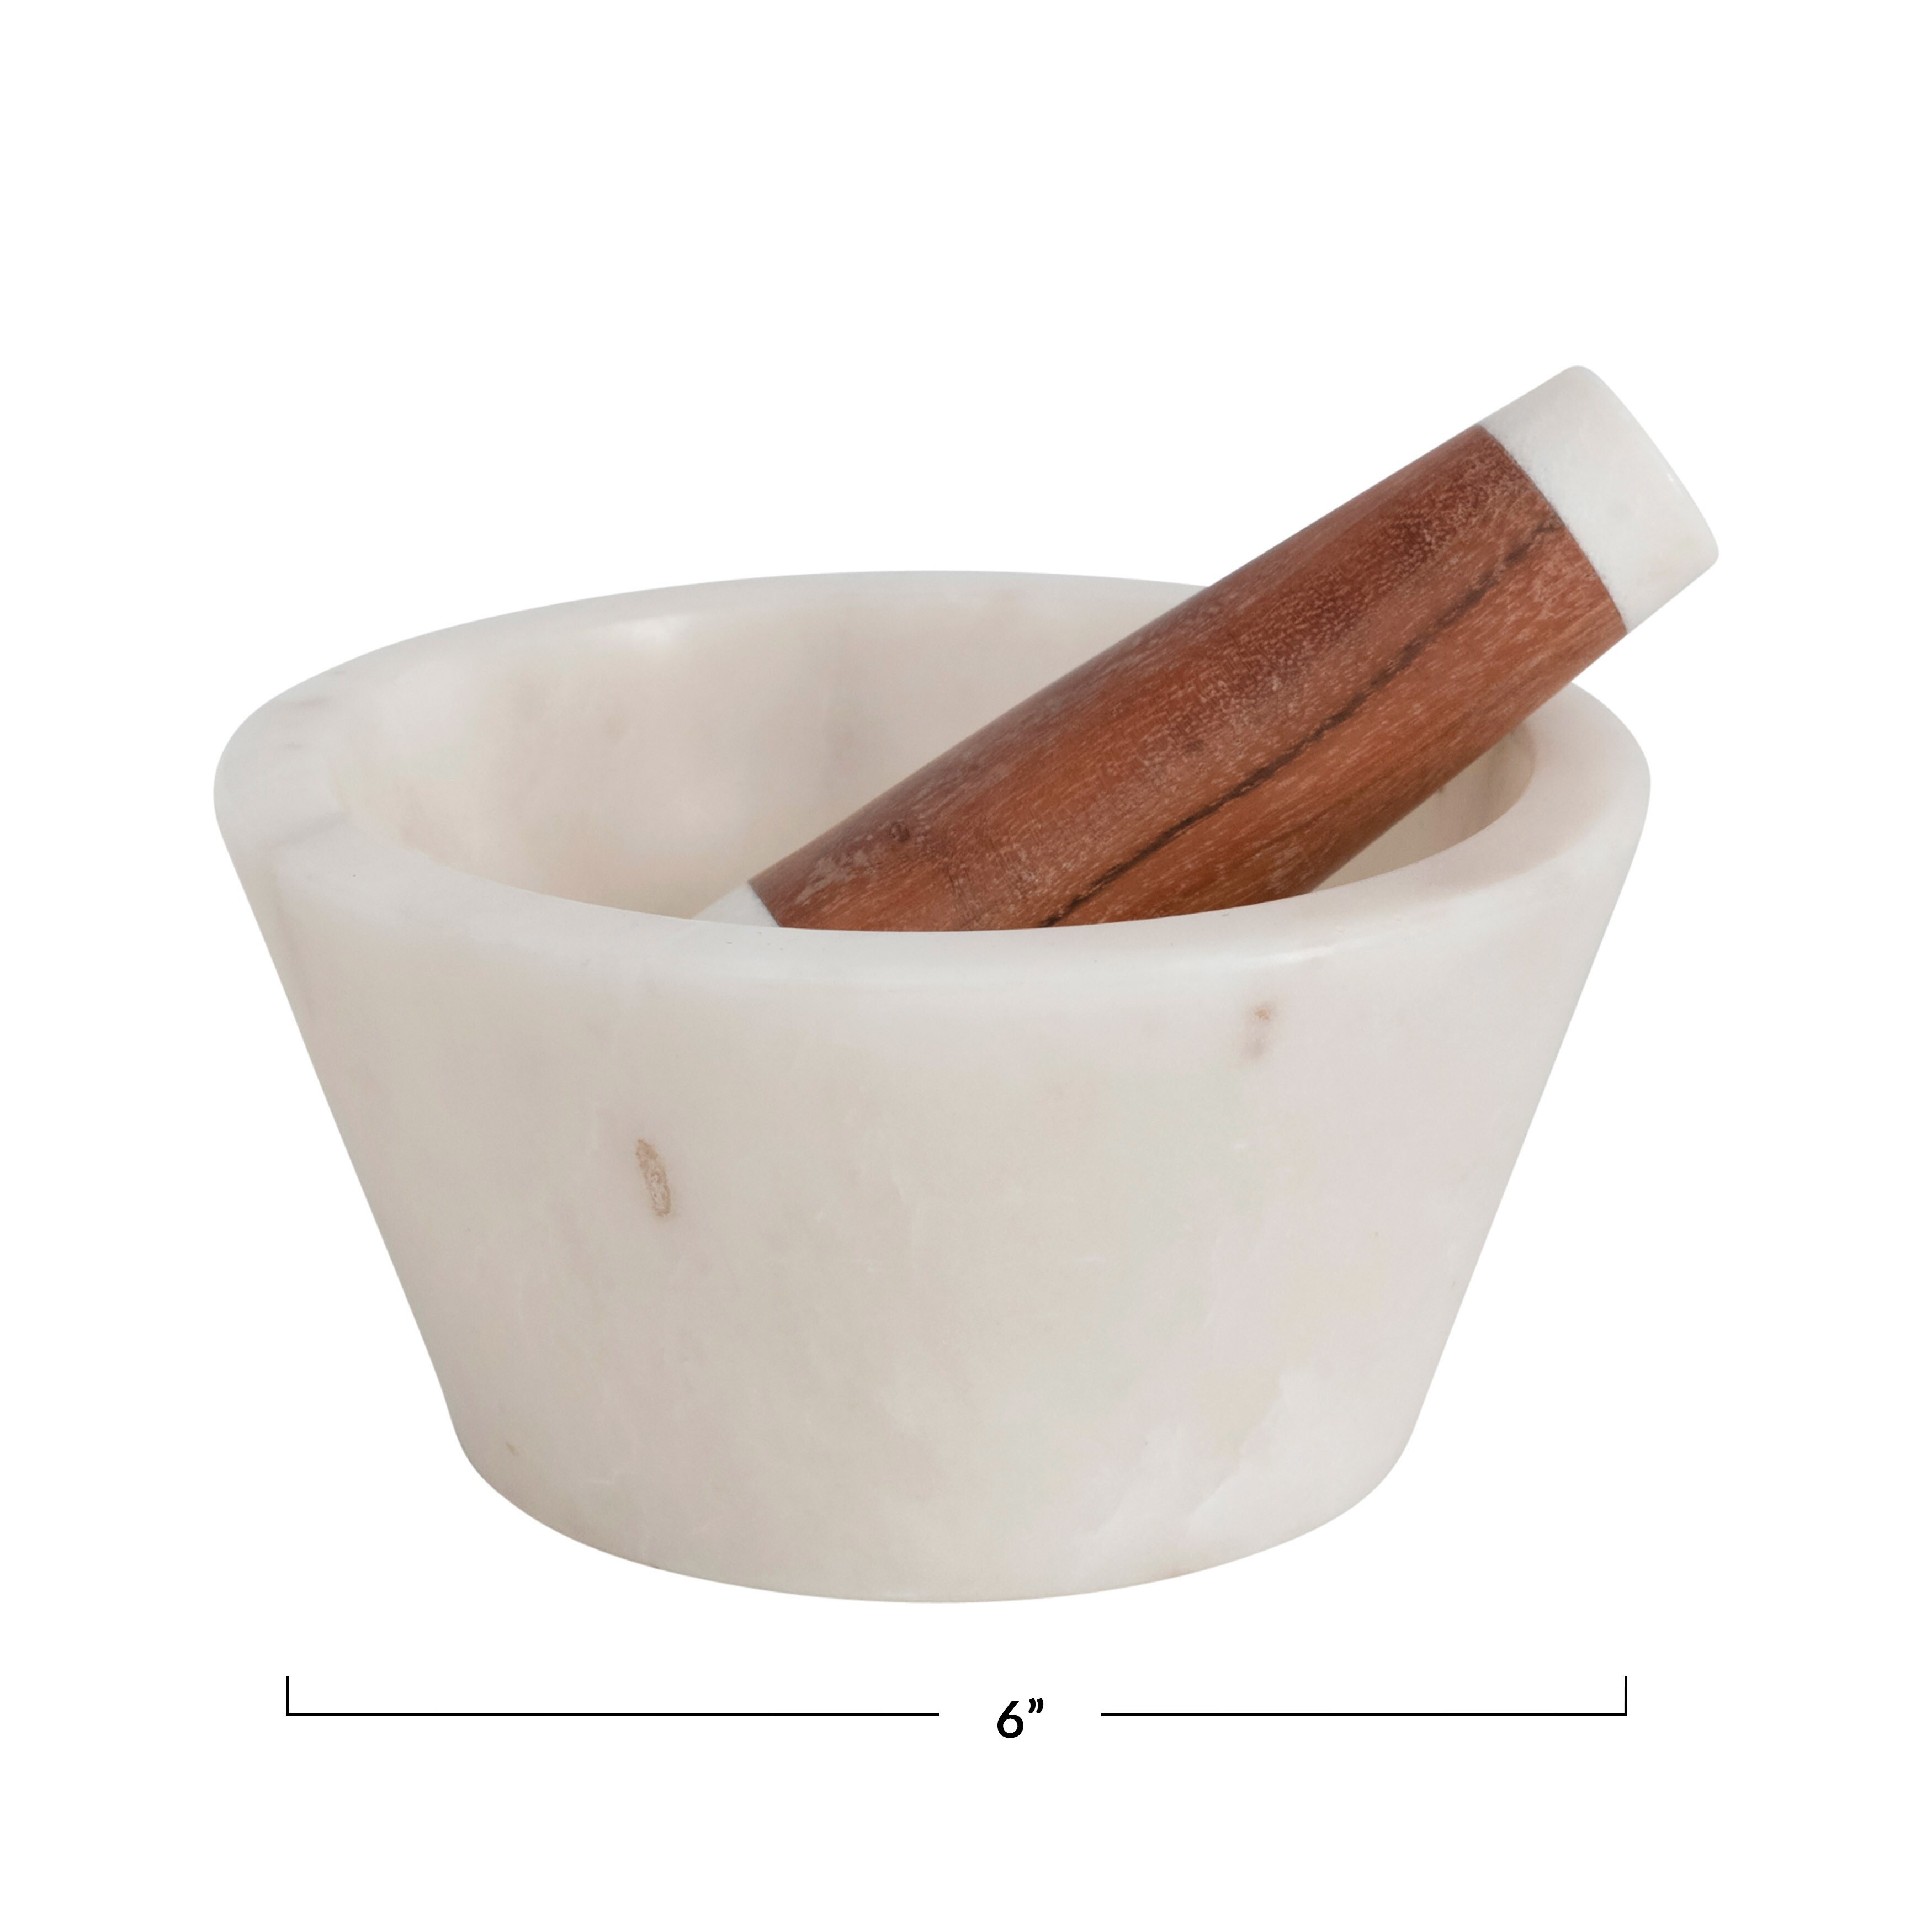 Marble and Acacia Wood Mortar and Pestle - 6.0"L x 6.0"W x 4.5"H